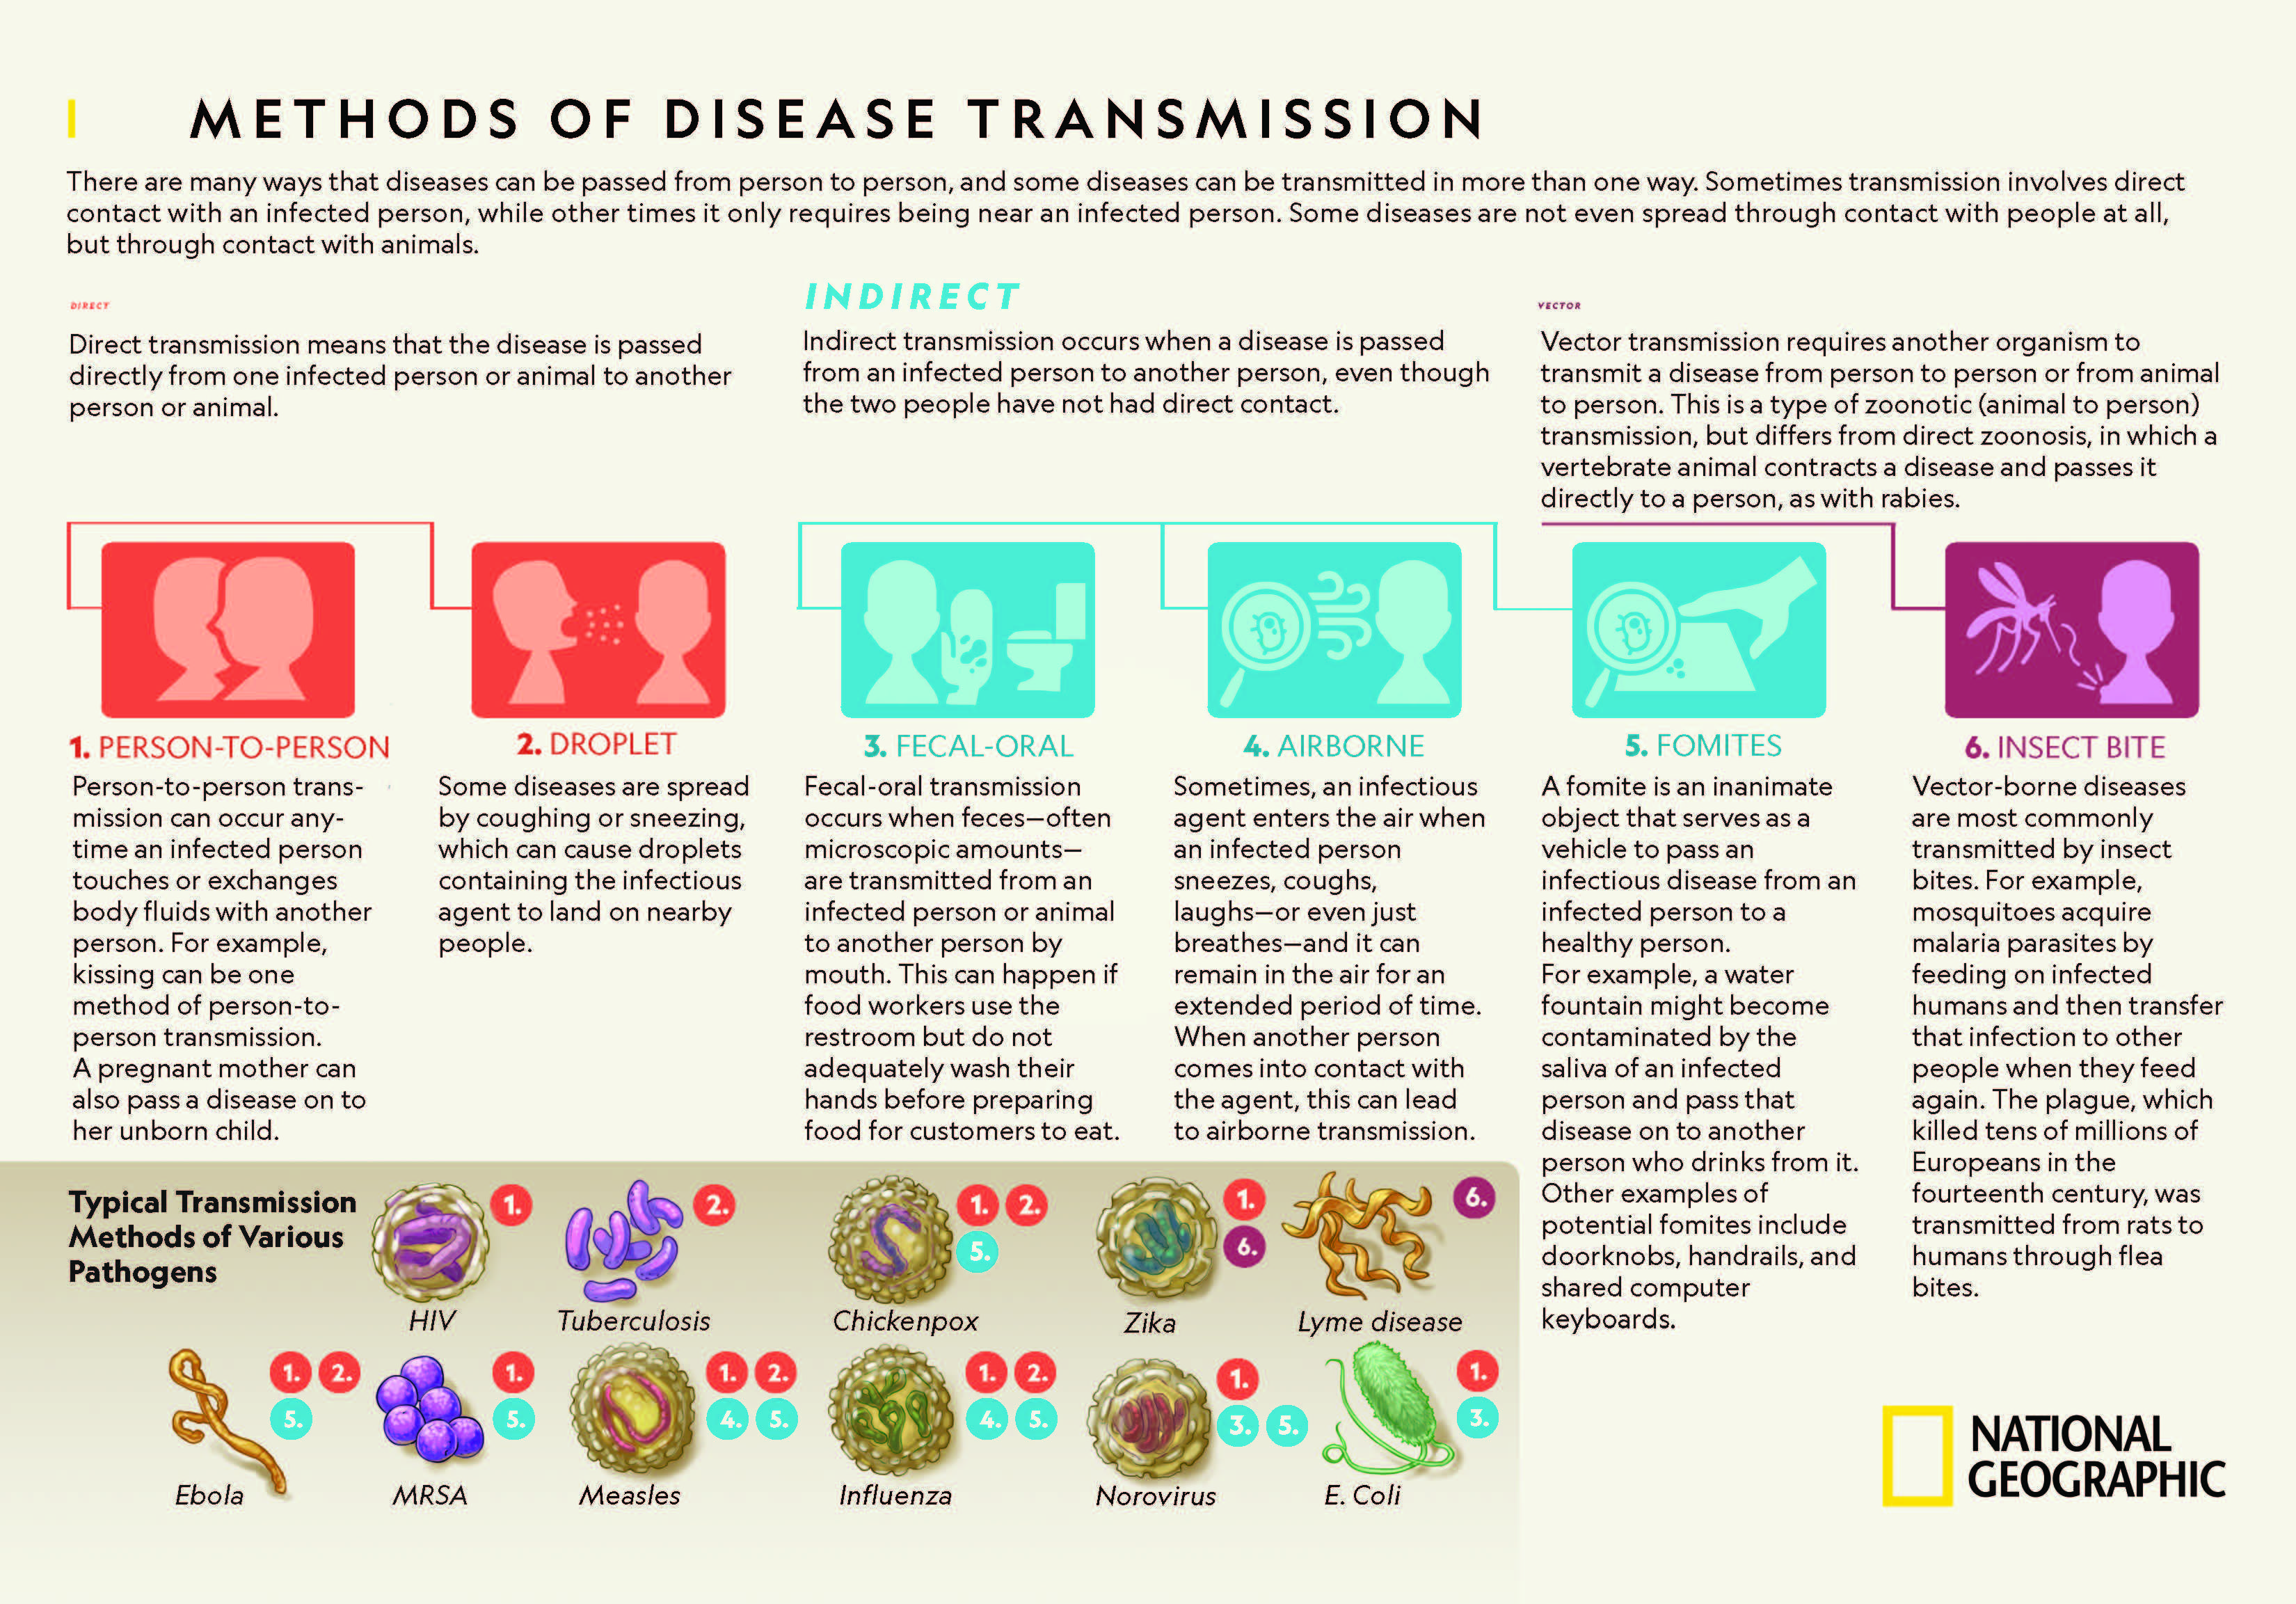 Methods of Disease Transmission | National Geographic Society